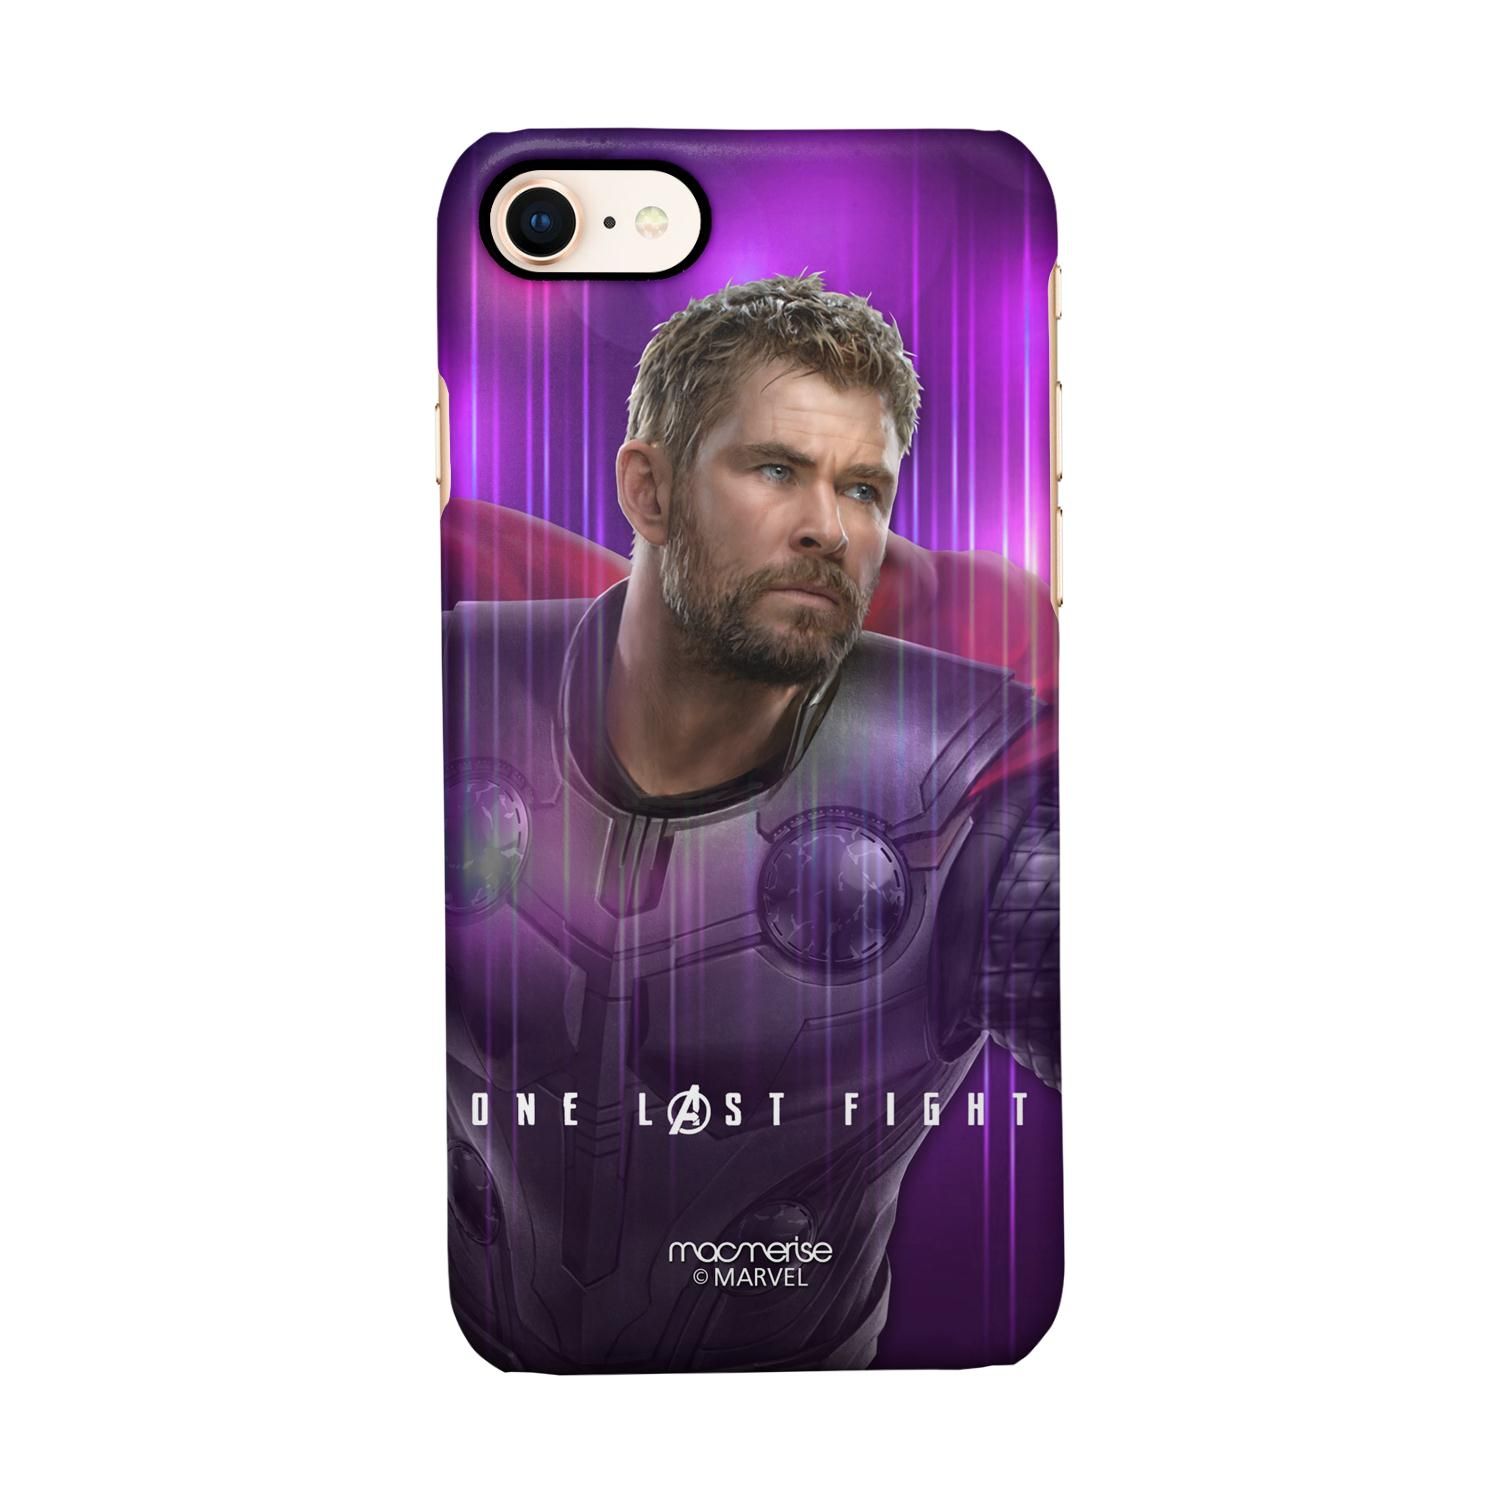 Buy One Last Fight - Sleek Phone Case for iPhone 8 Online